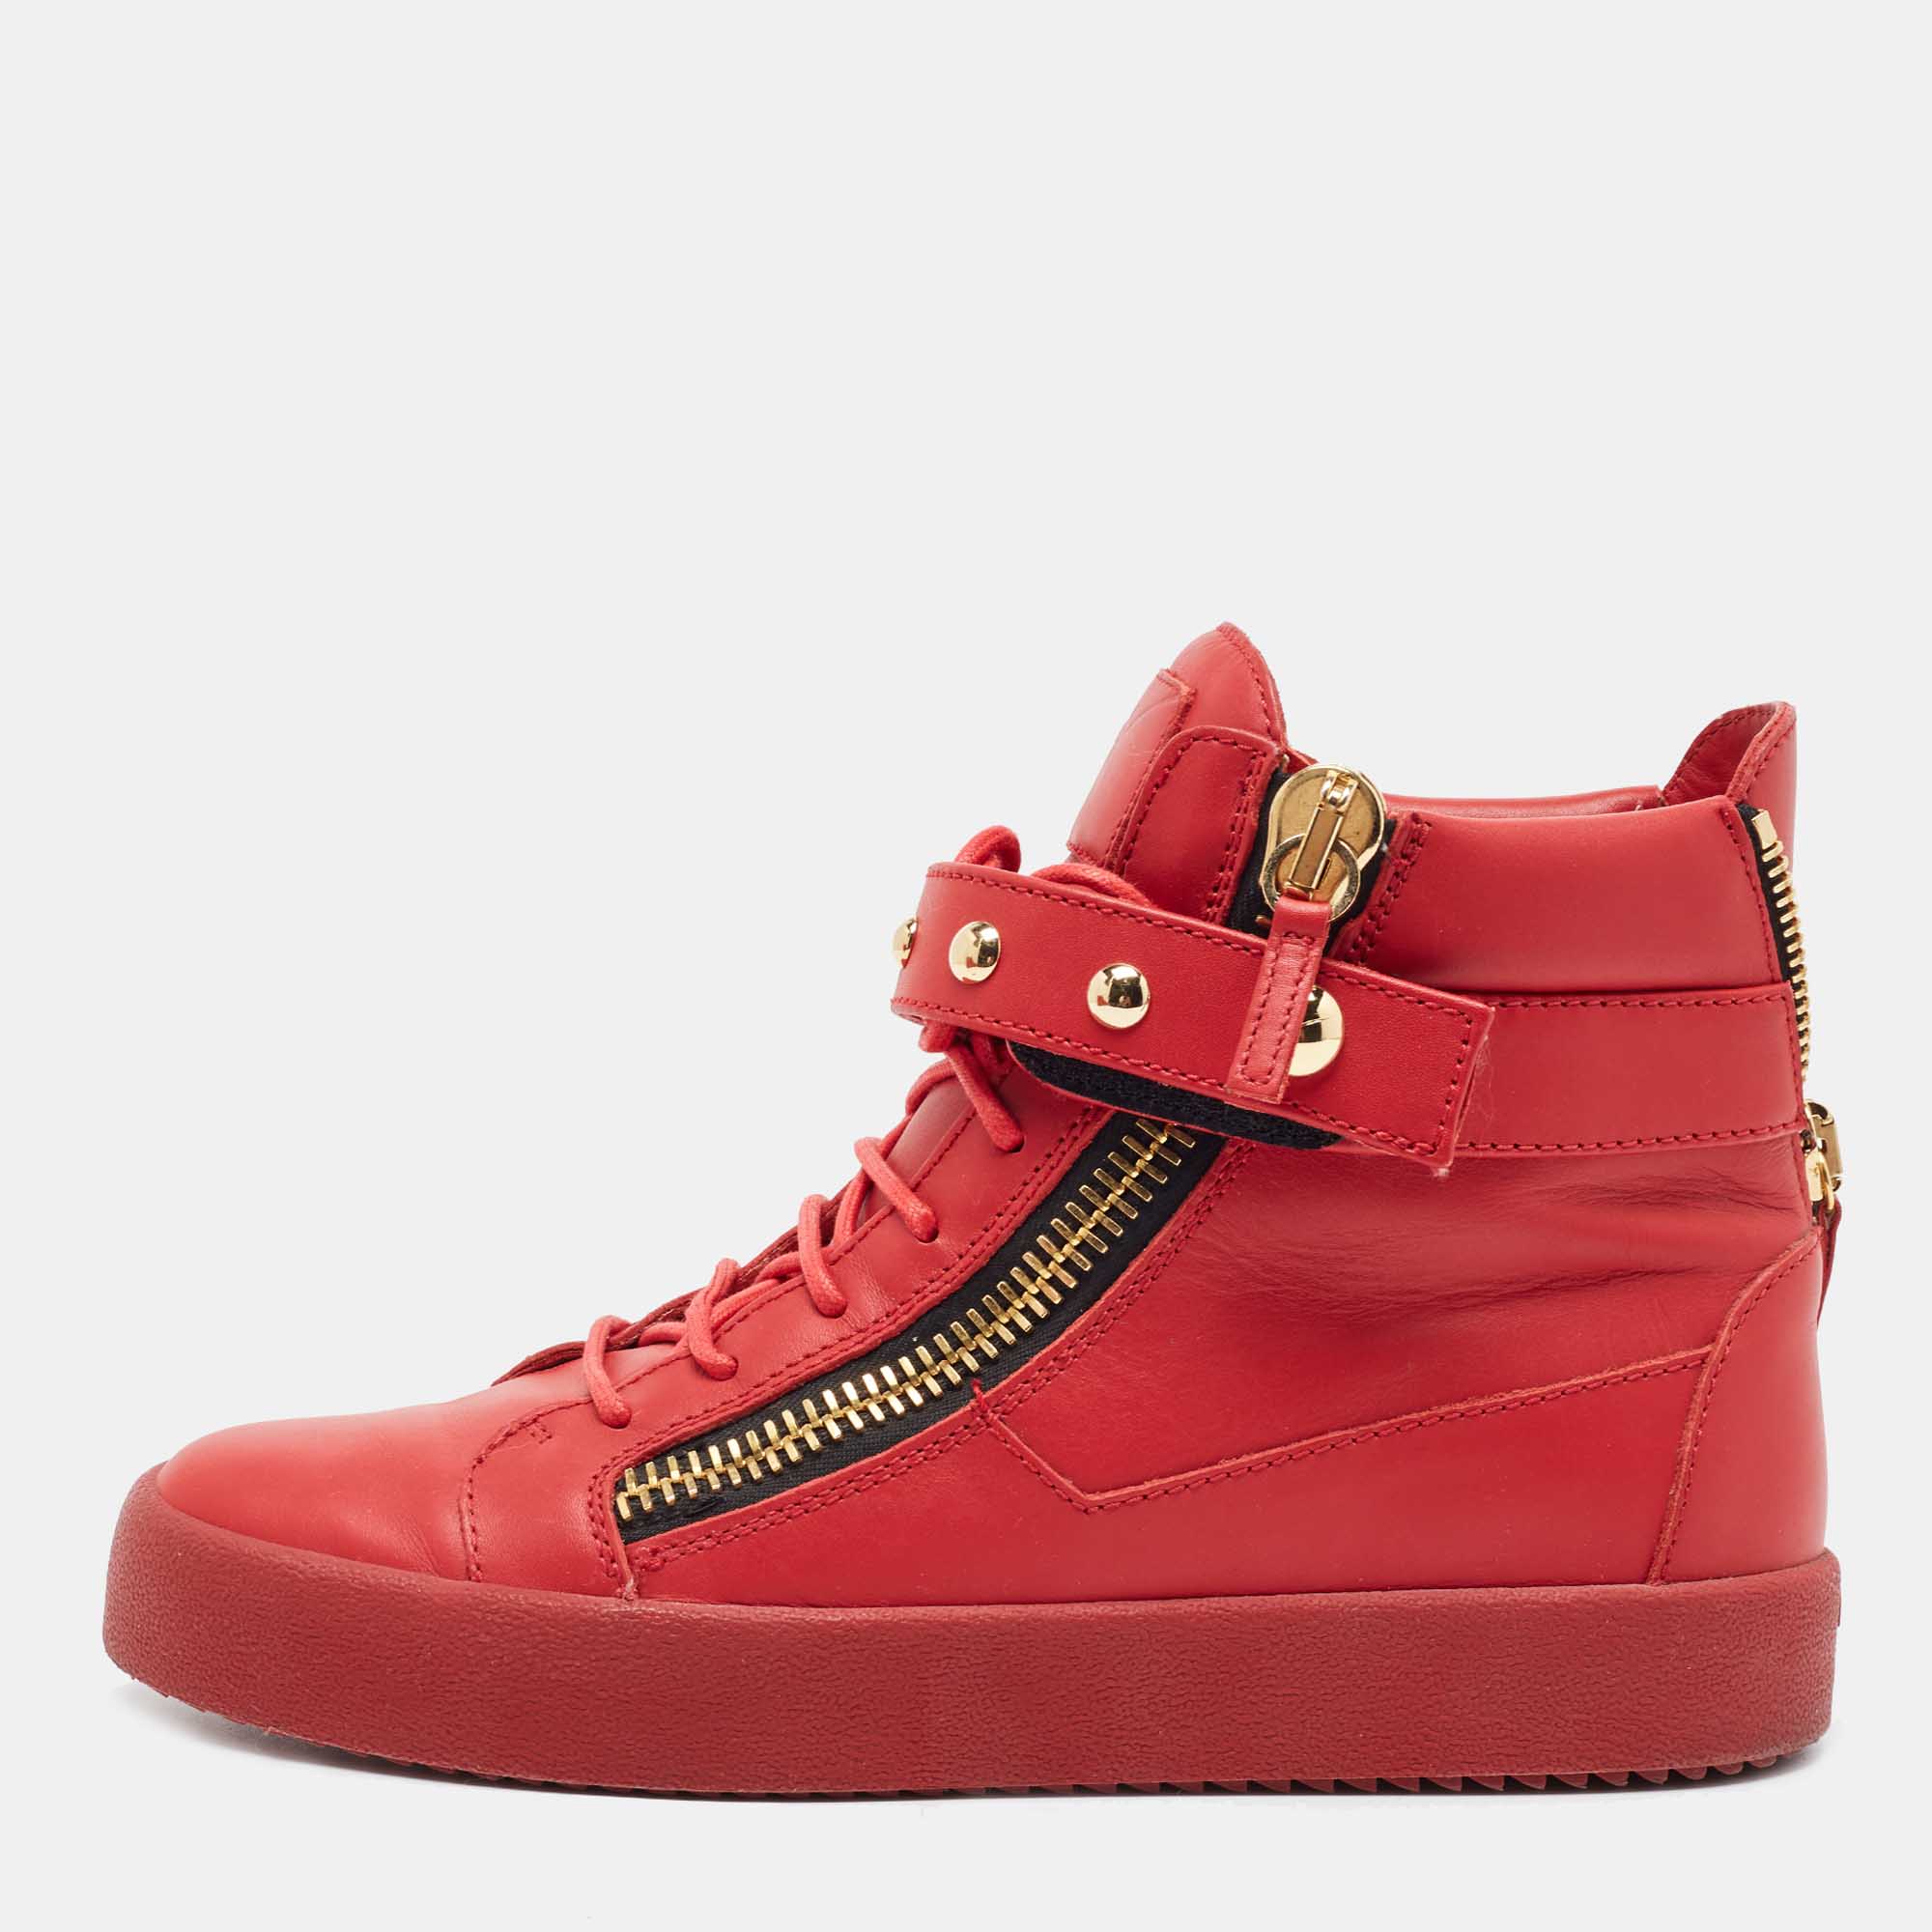 Giuseppe Zanotti Red Leather Studded Double Zip High Top Sneakers Size 44